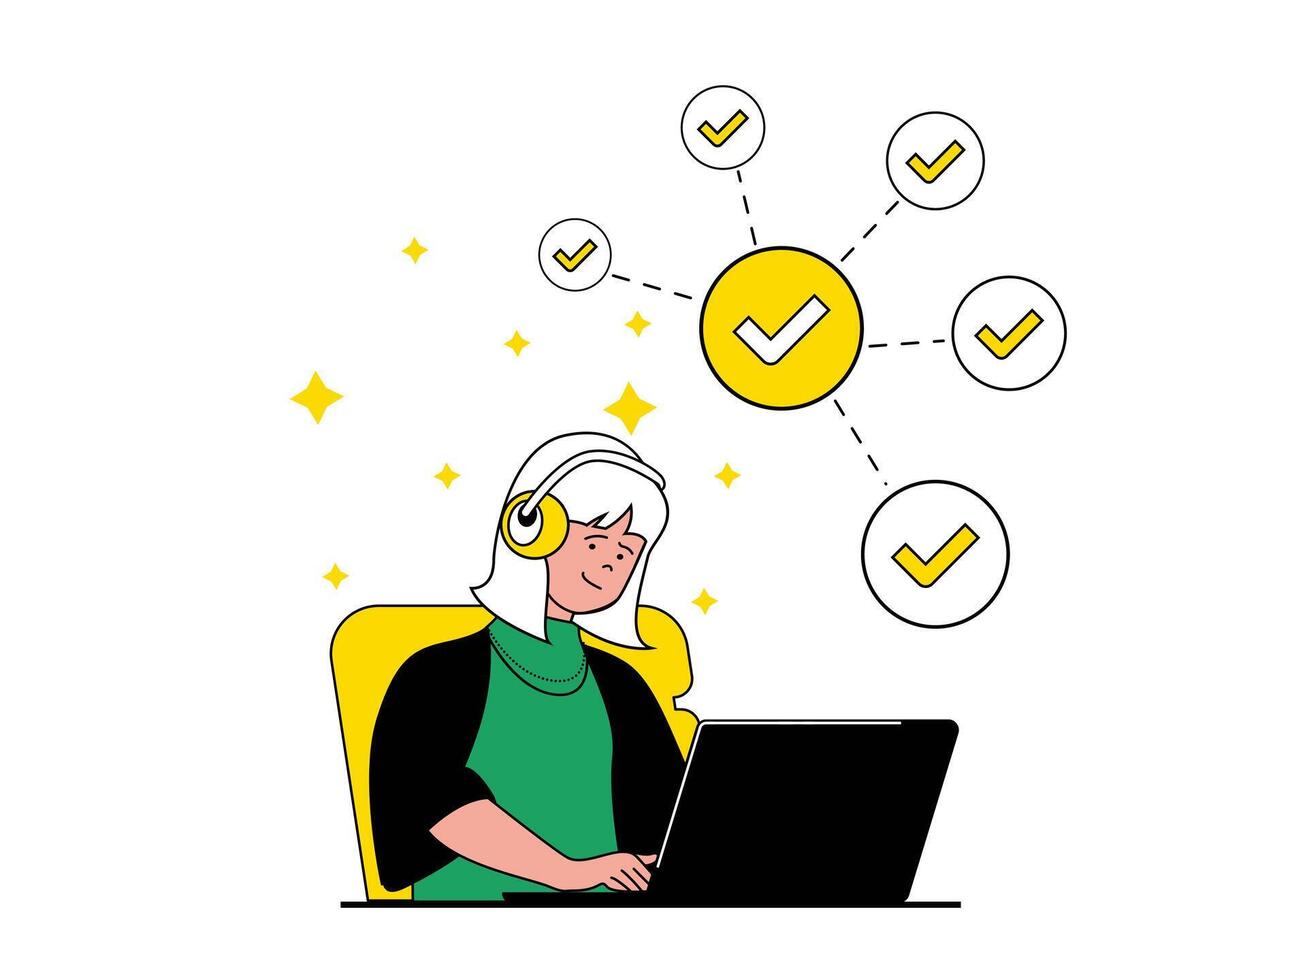 Productivity workplace concept with character situation. Woman works on laptop and performs work tasks, organizes workflow in office. Vector illustration with people scene in flat design for web